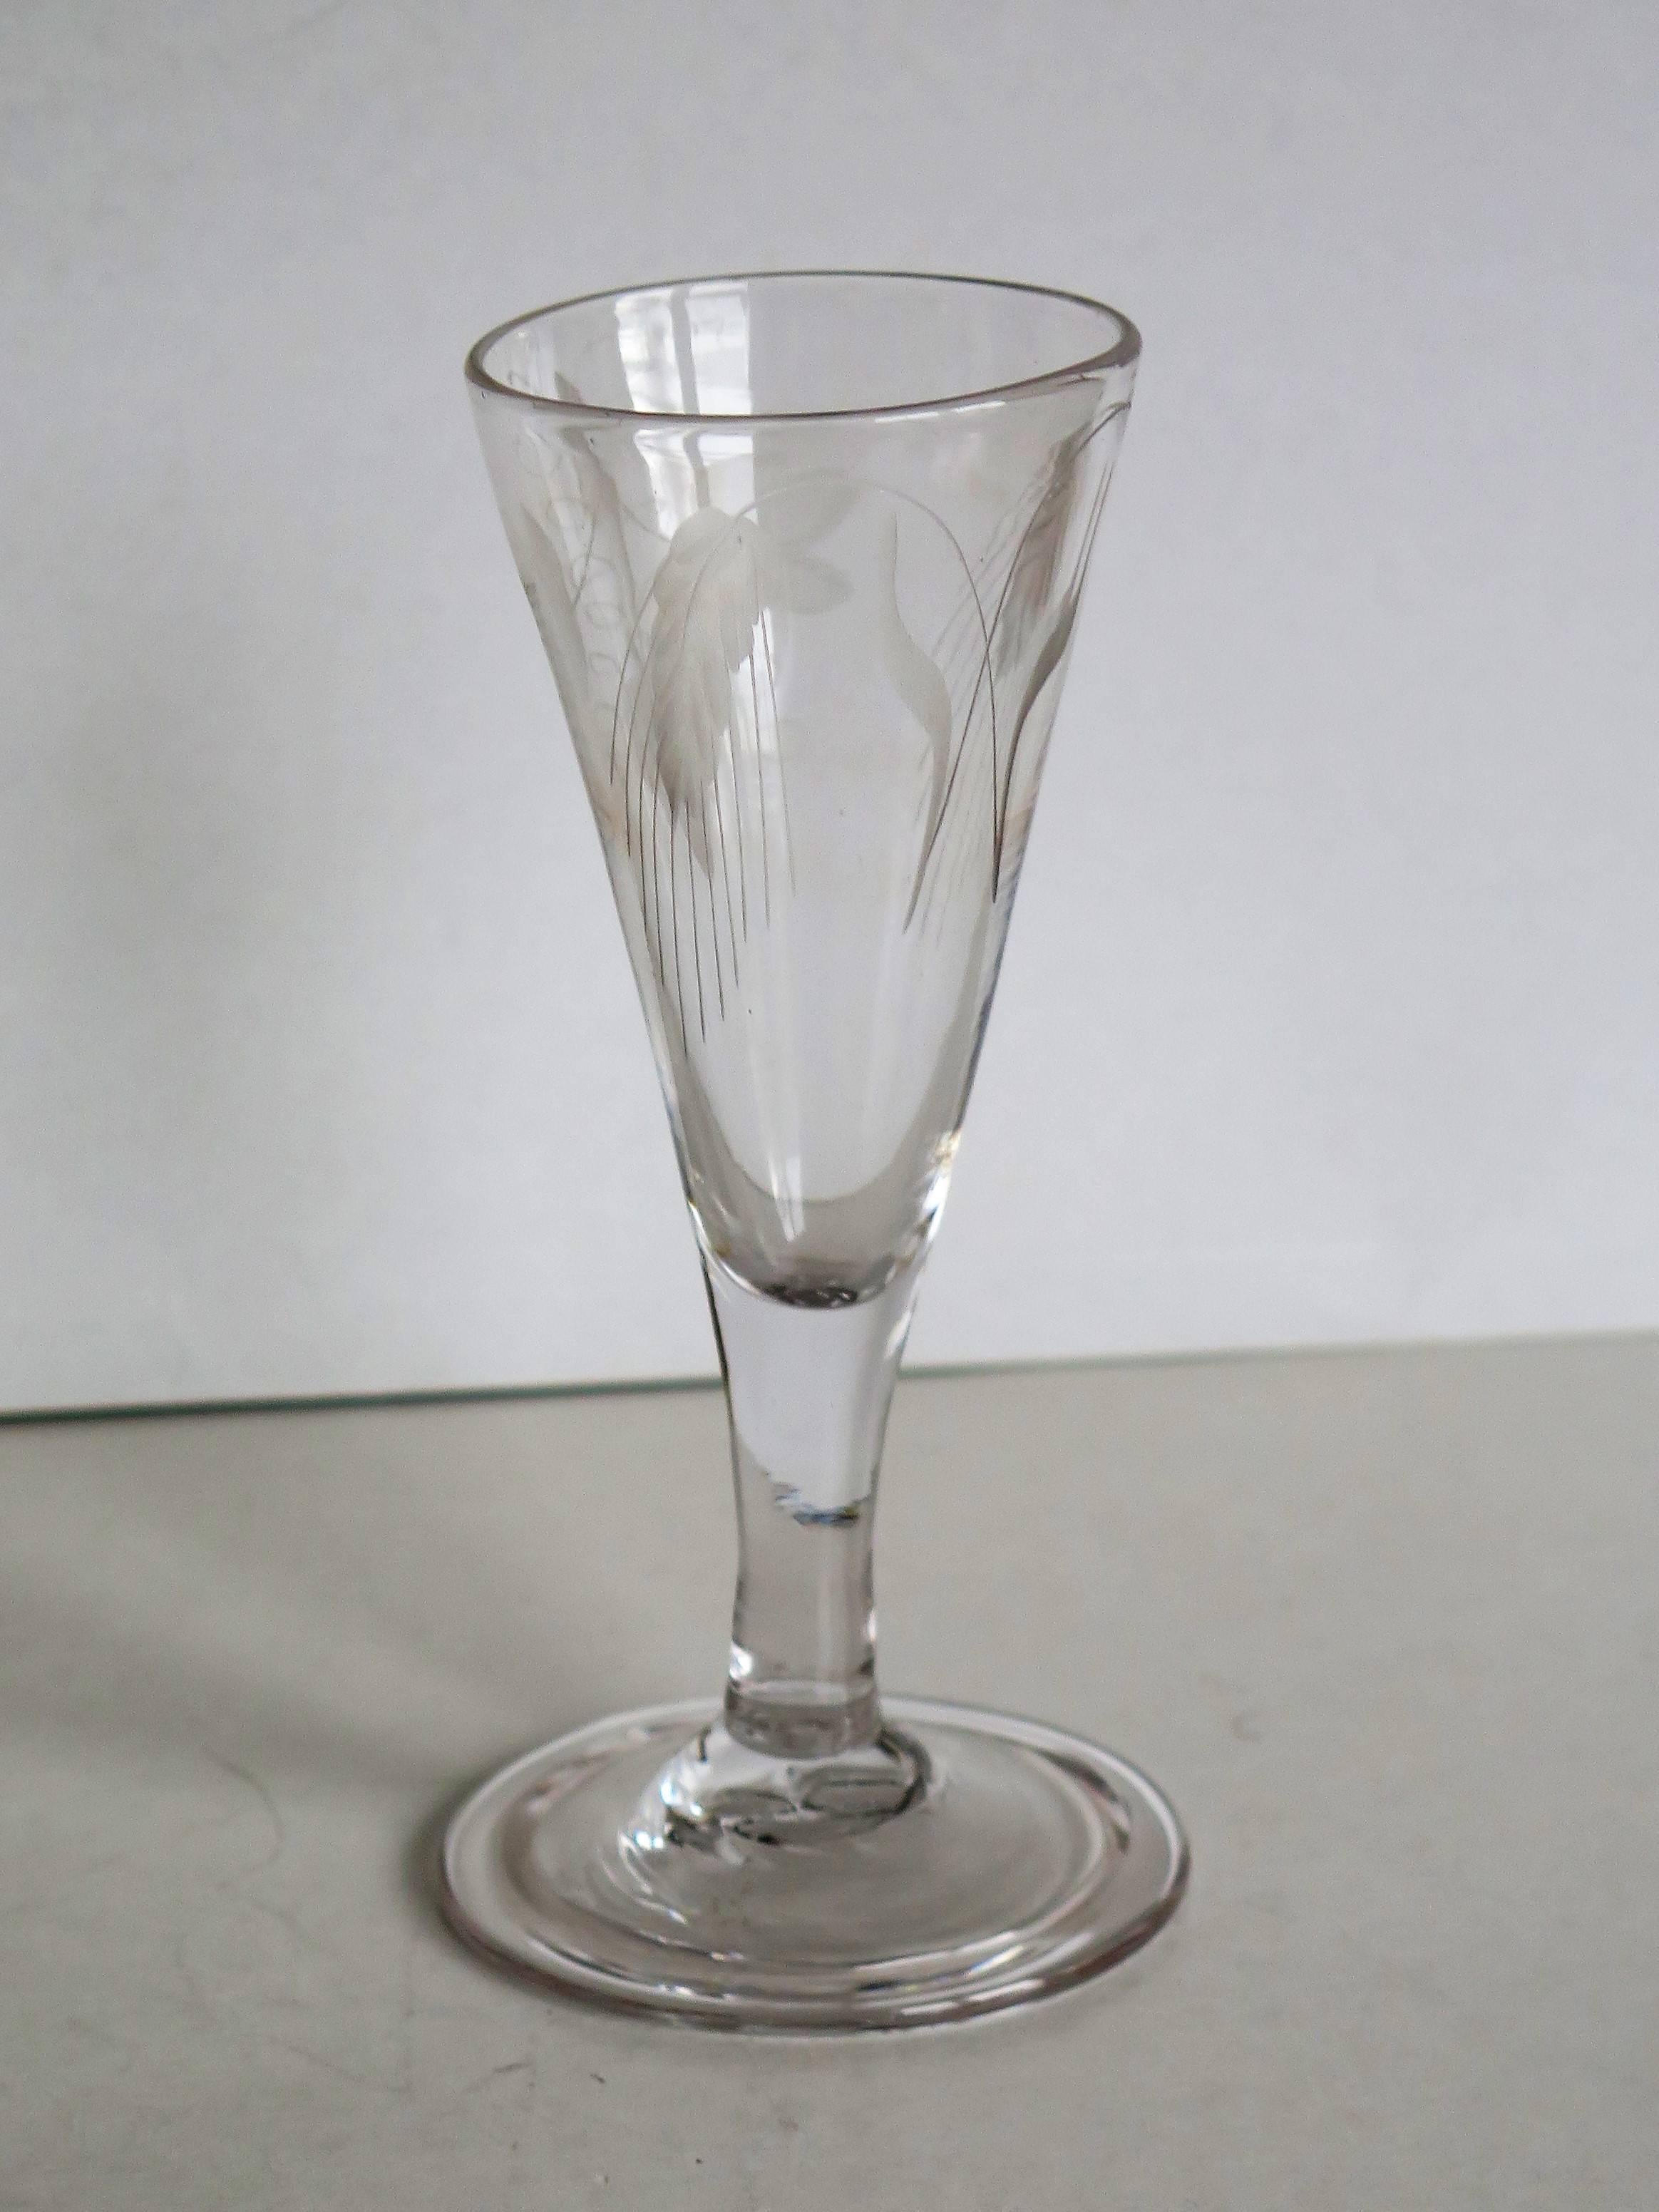 18th Century Mid-Georgian Ale Drinking Glass Handblown Engraved with Hops and Barley, Ca 1750